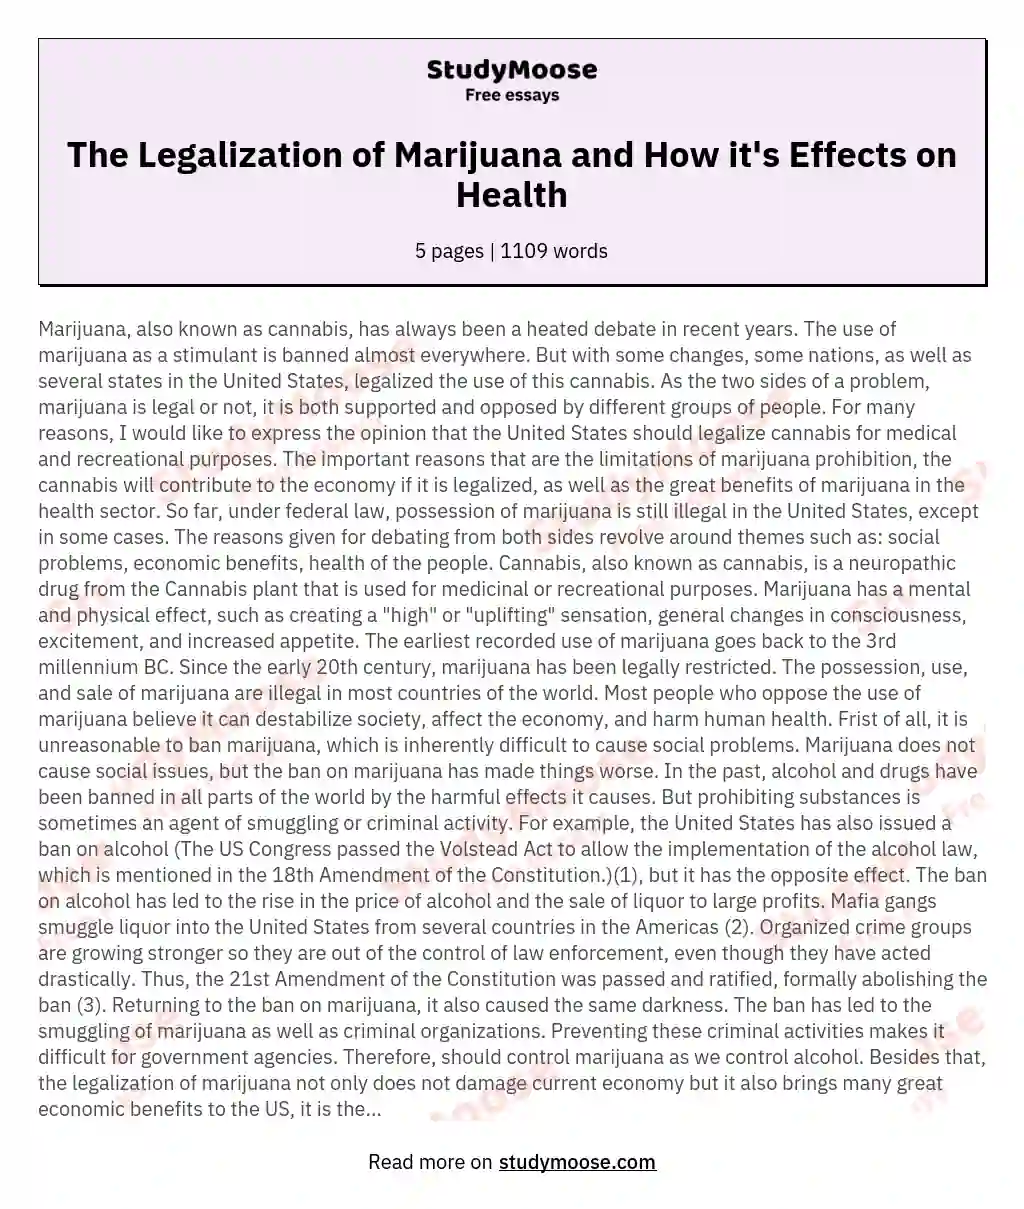 The Legalization of Marijuana and How it's Effects on Health essay